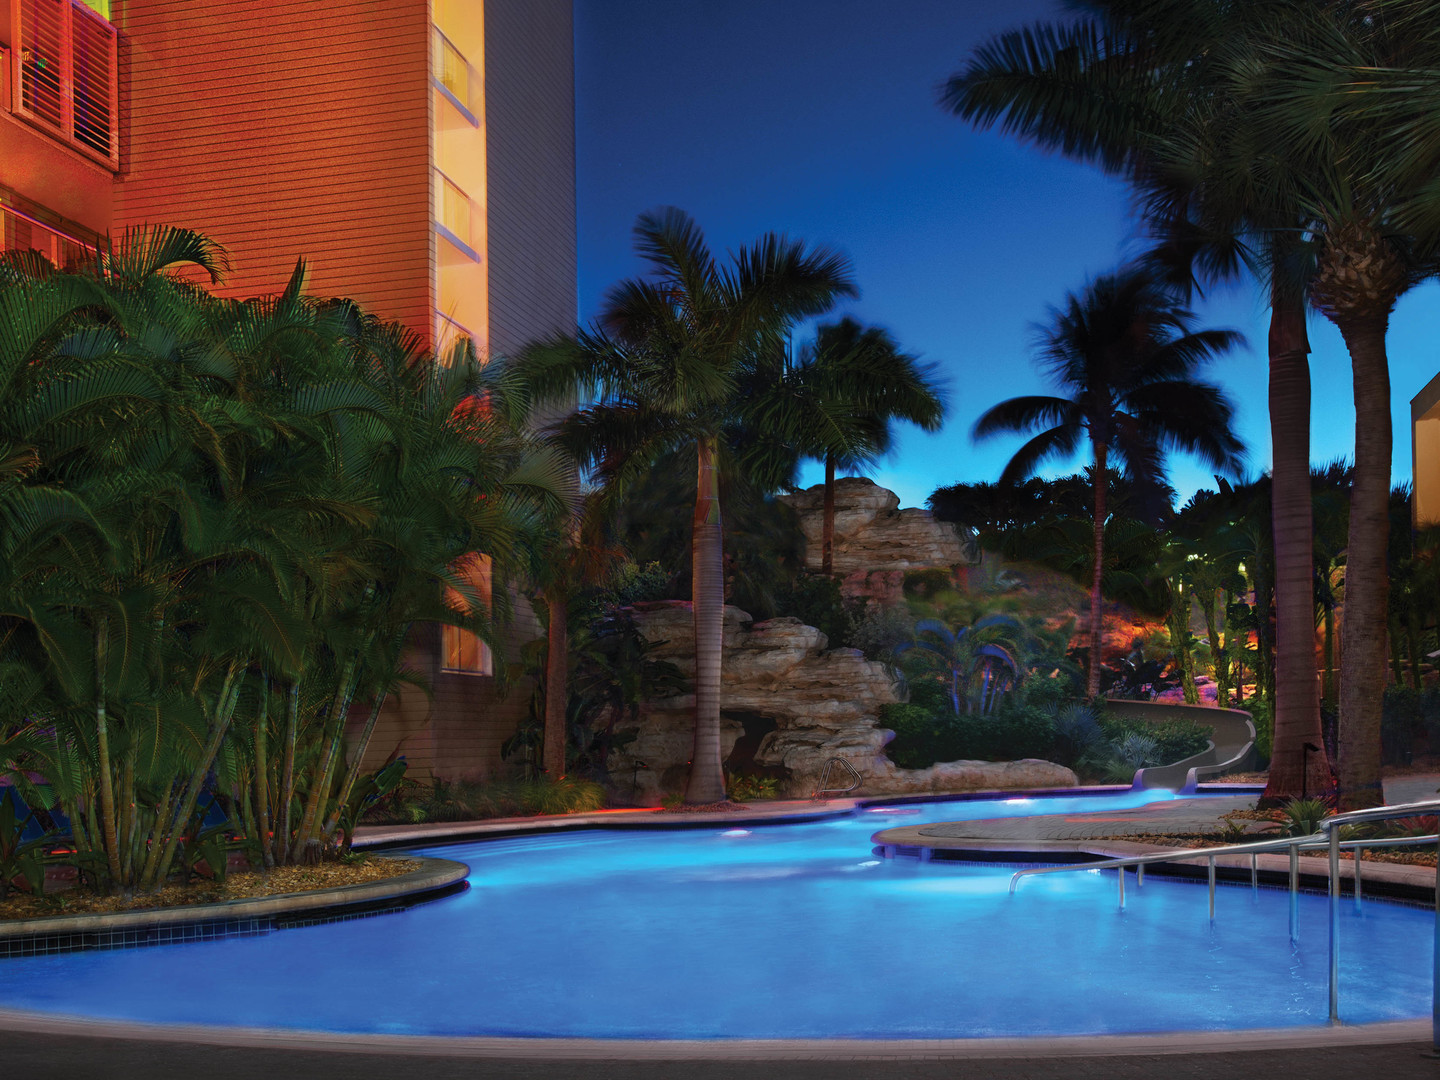 Marriott's Crystal Shores Grotto Pool. Marriott's Crystal Shores is located in Marco Island, Florida United States.